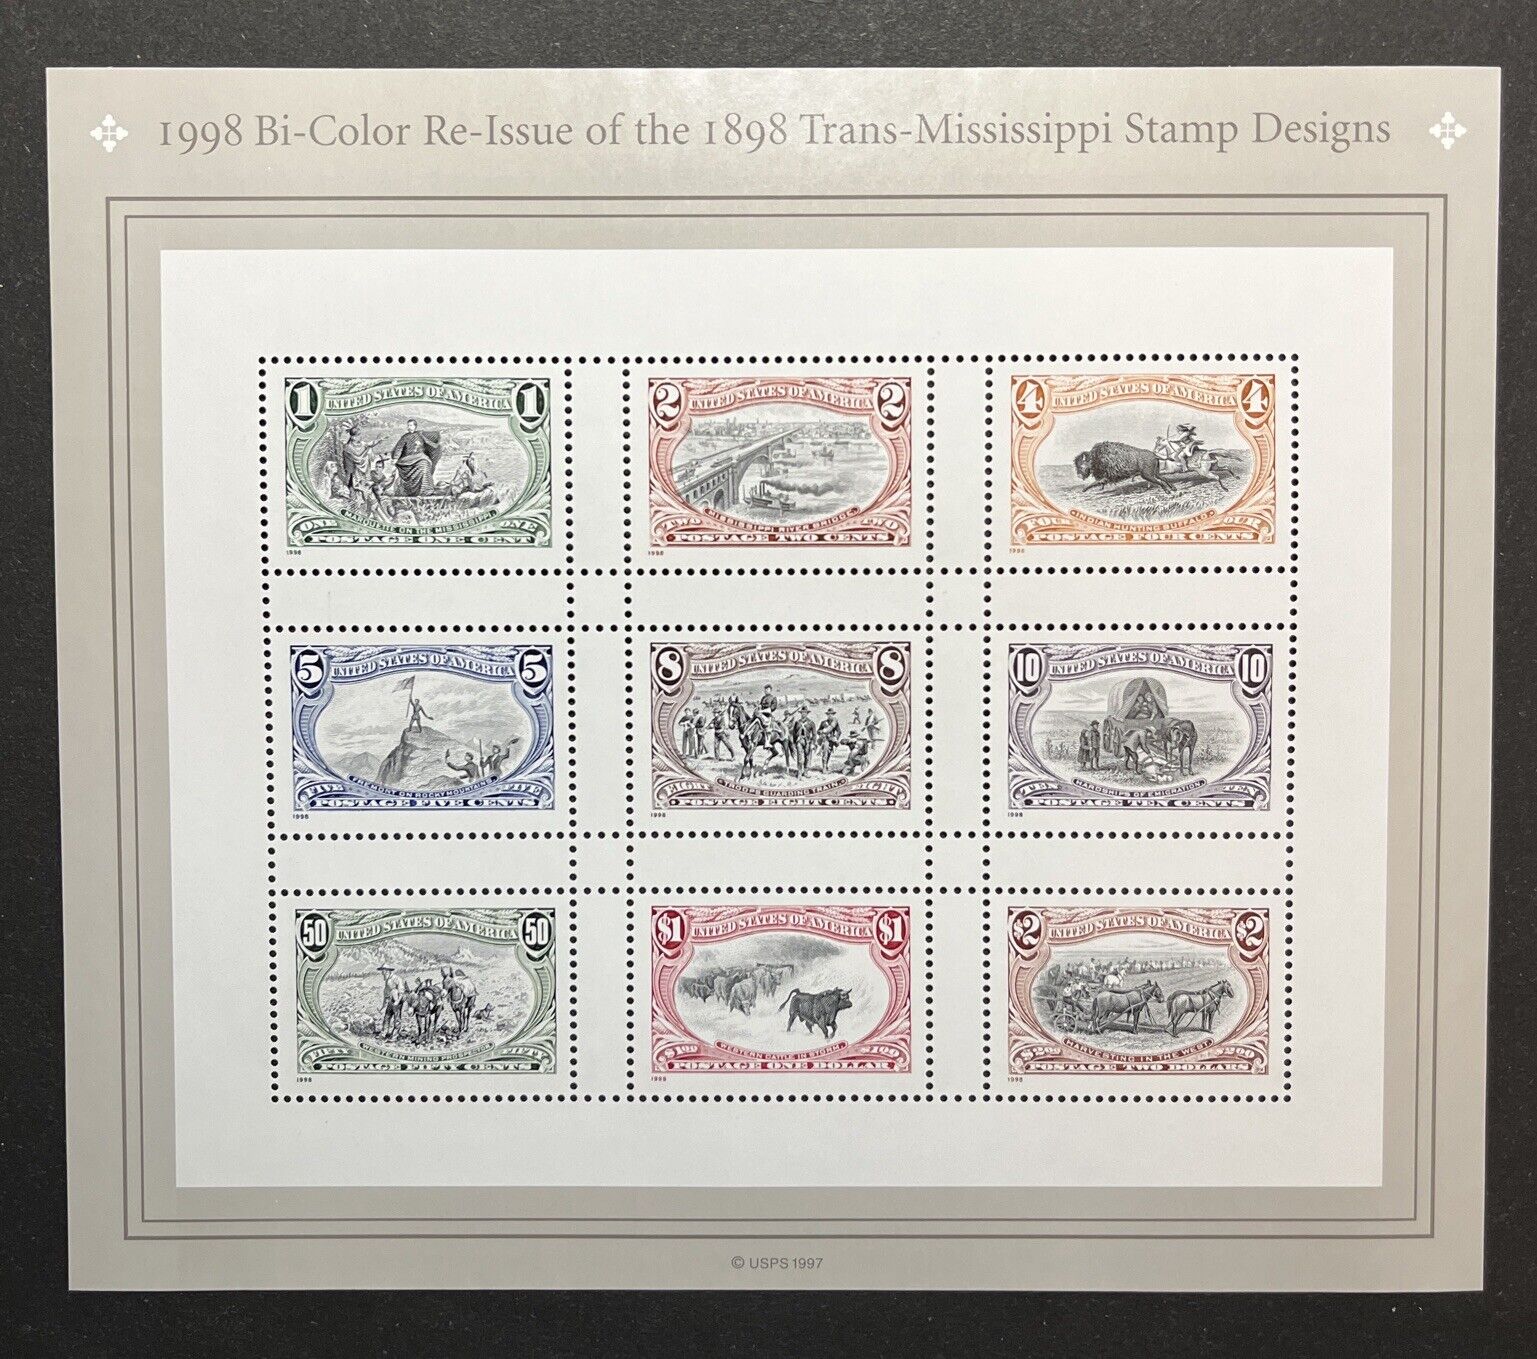  1998 Bi-Color Re-Issue of the 1898 Trans-Mississippi Stamp Designs 